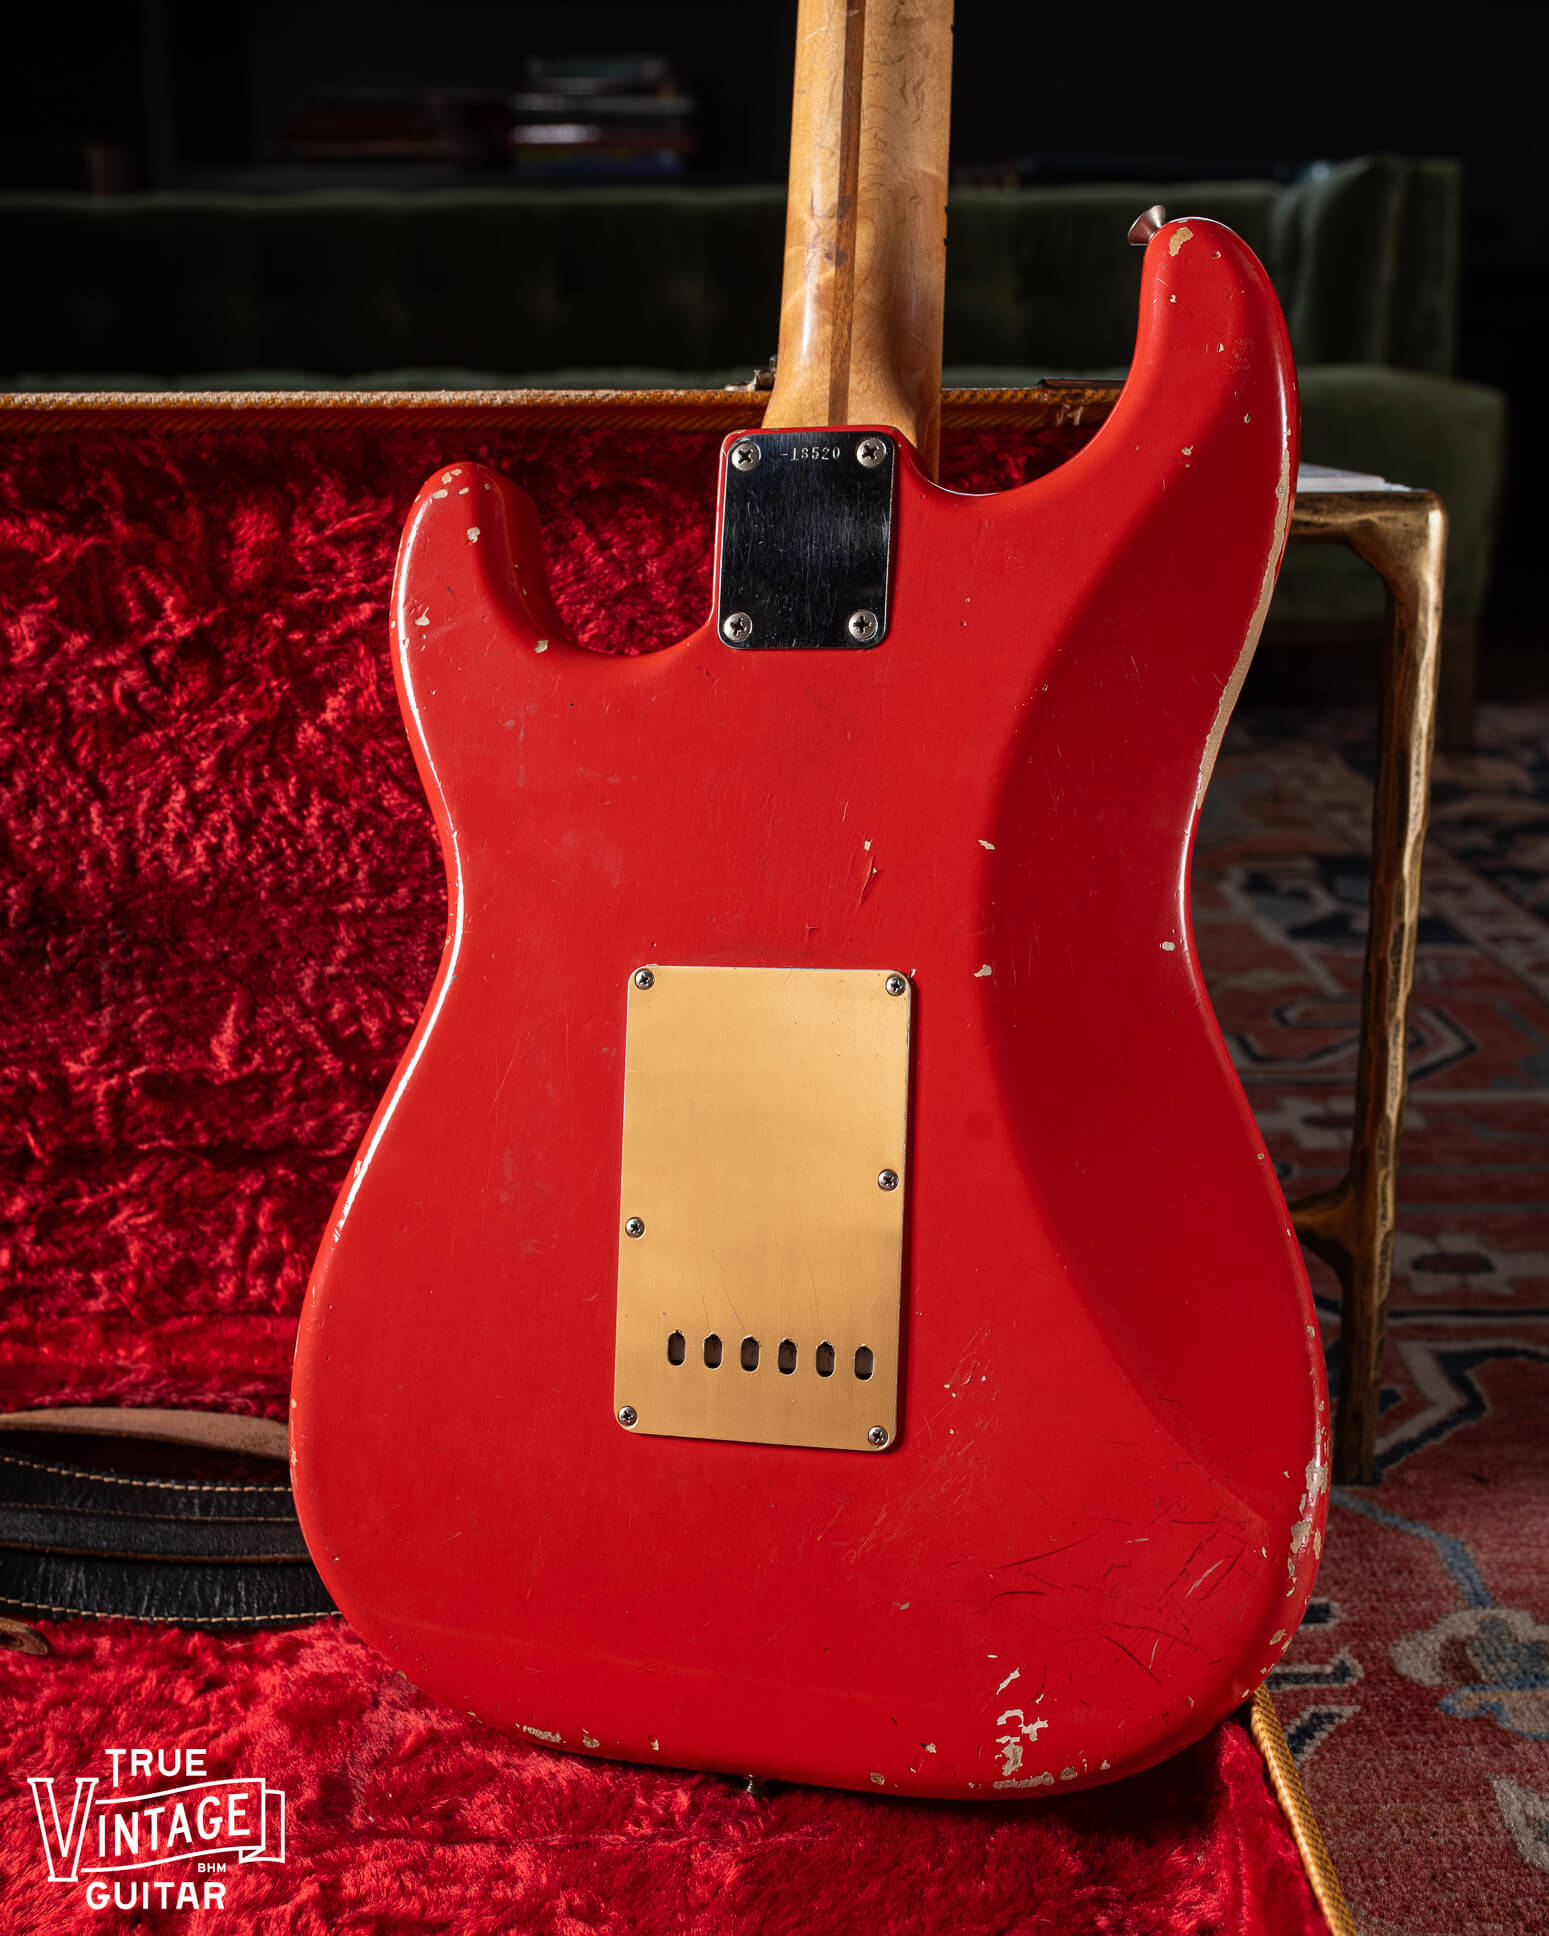 Gold anodized aluminum tremolo cover plate on 1957 Fender Stratocaster Red